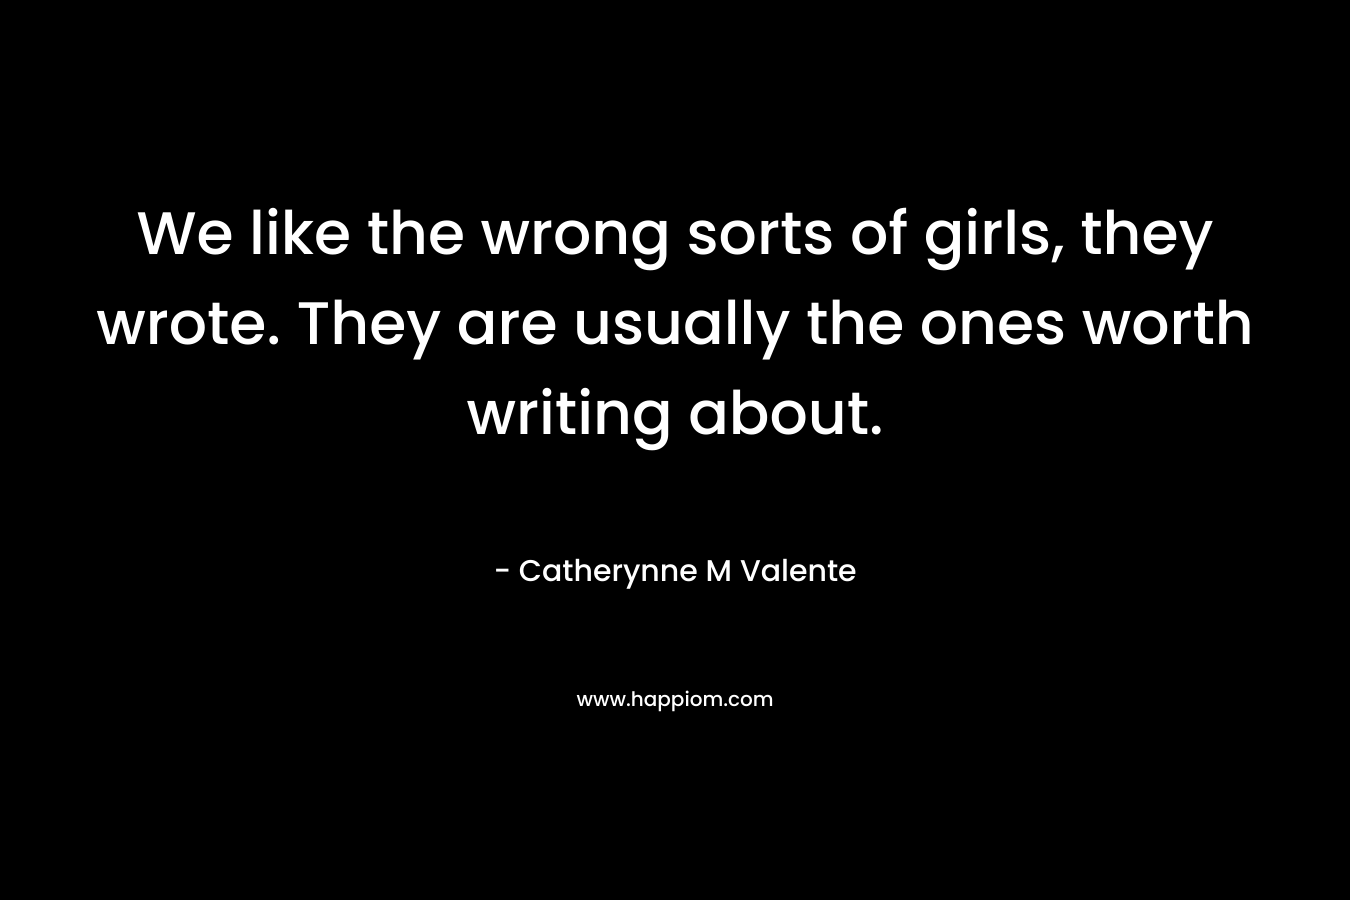 We like the wrong sorts of girls, they wrote. They are usually the ones worth writing about.